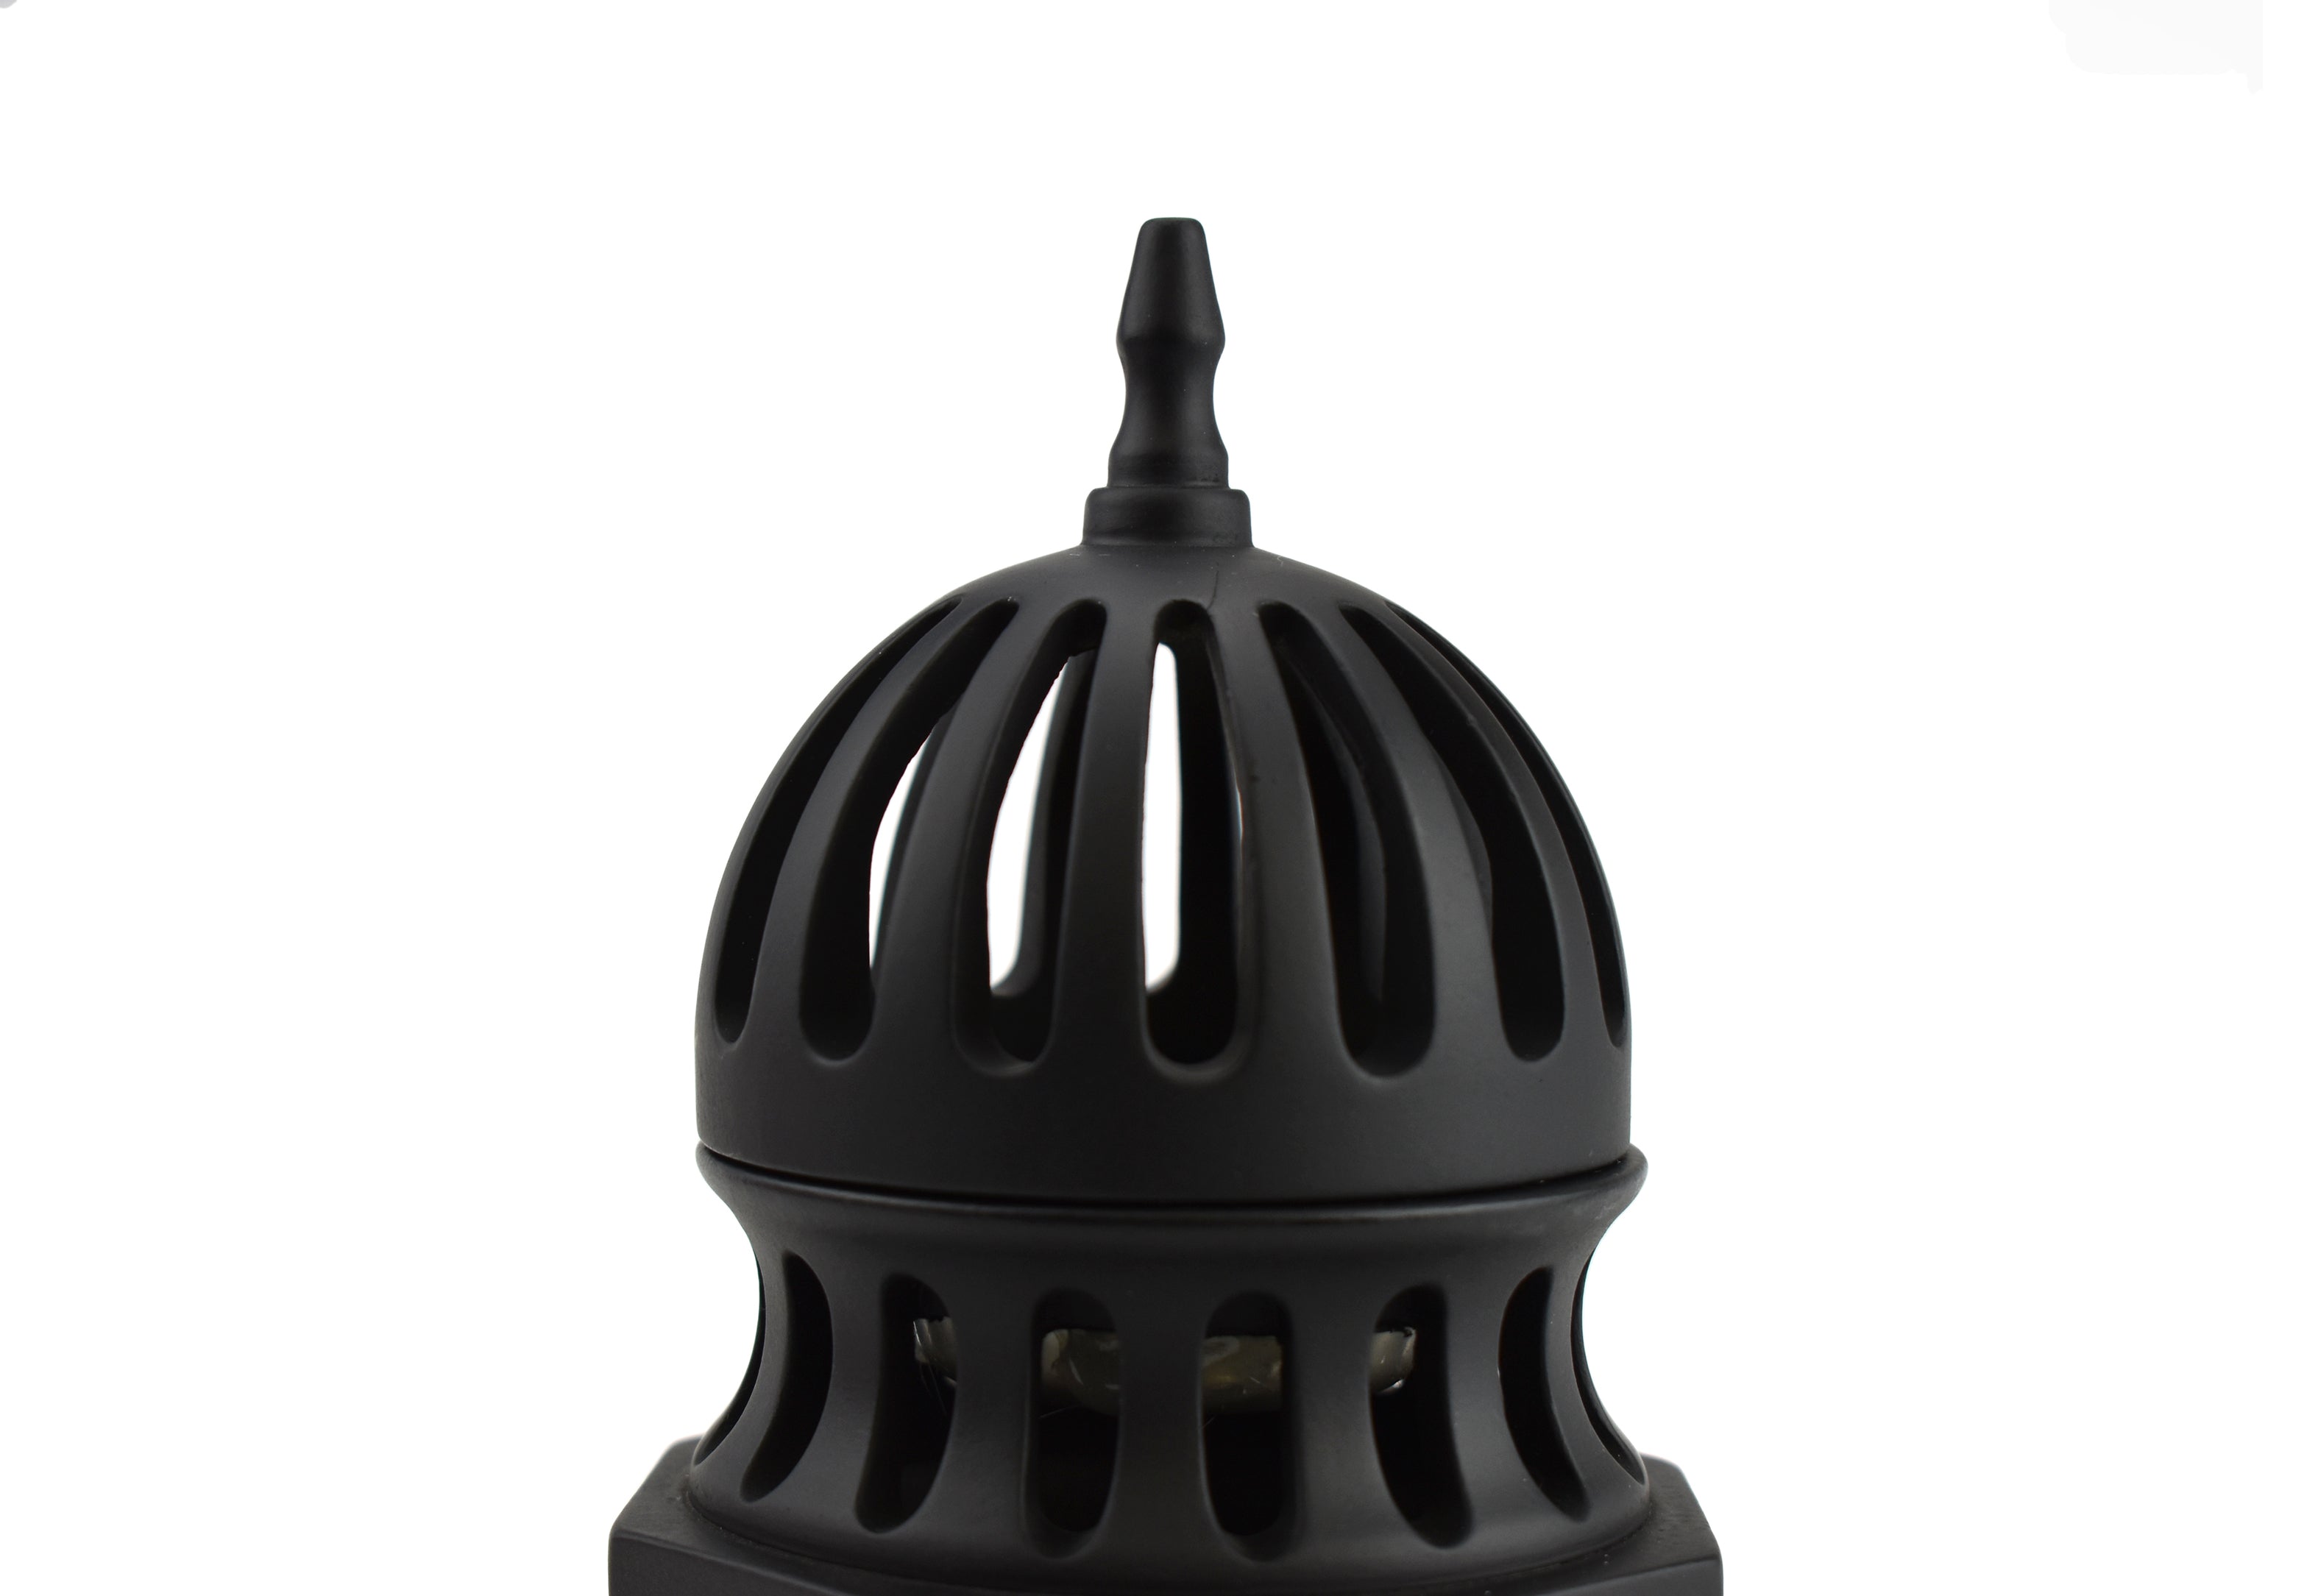 Classic Traditional Dome Style Closed Incense Bakhoor Burner - Black - Intense oud